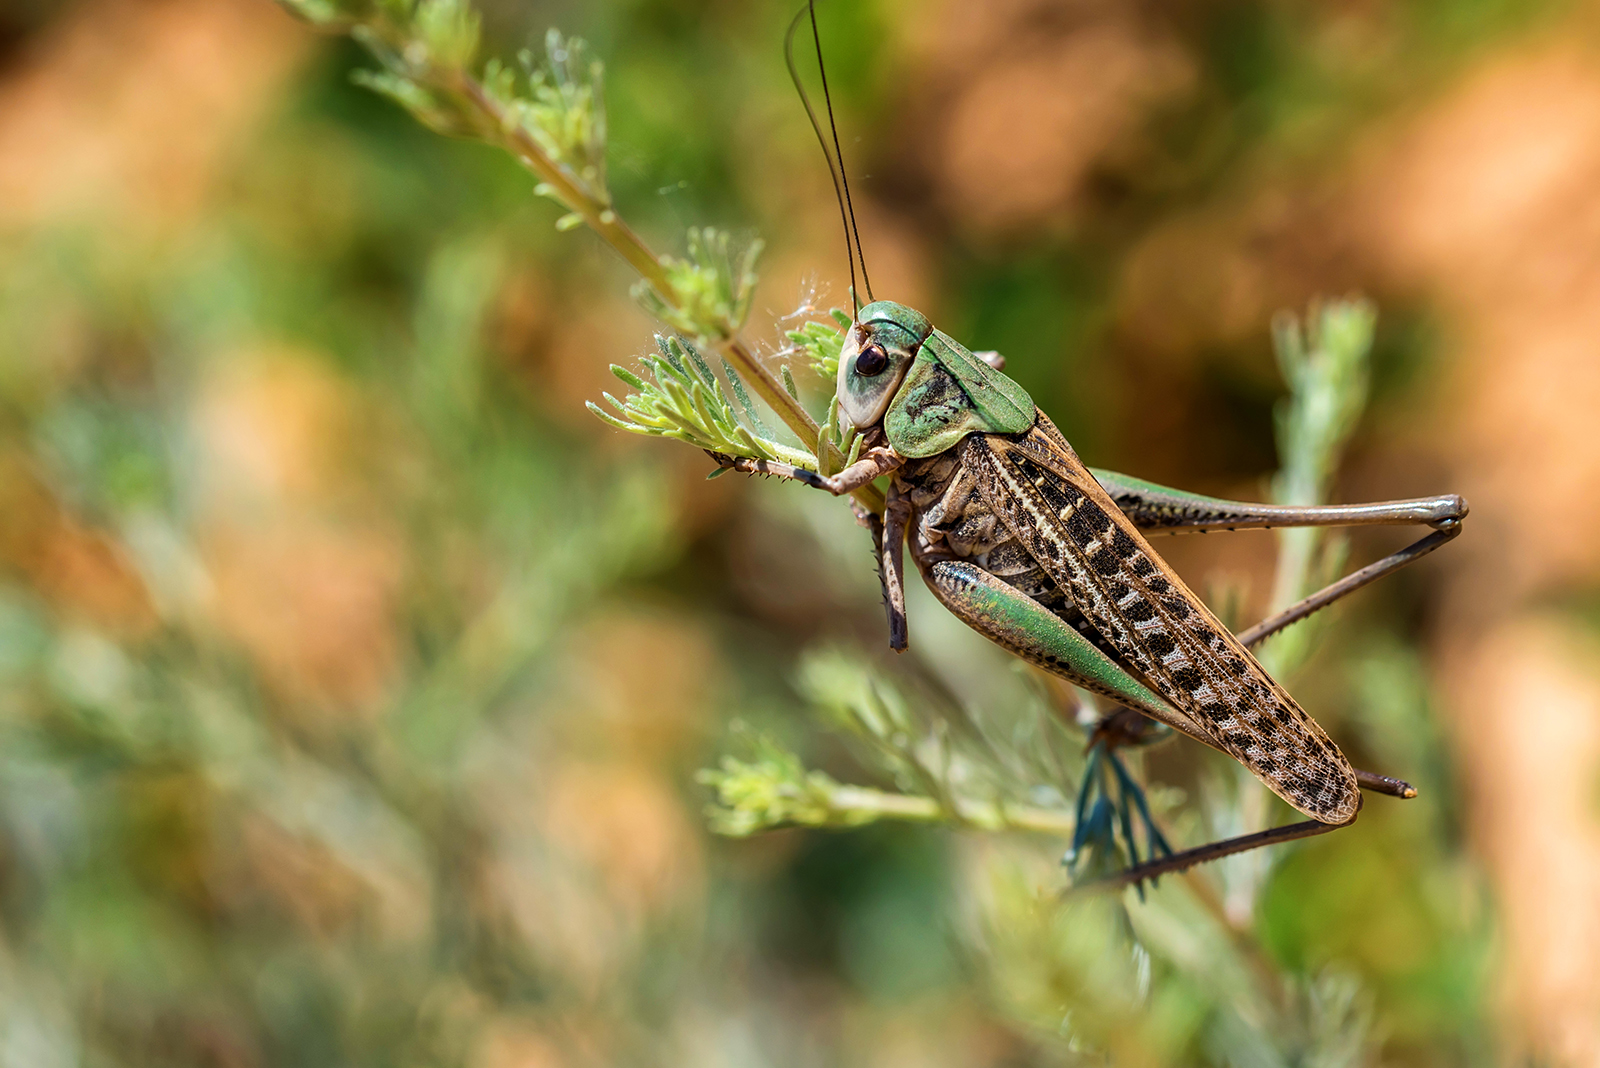 Why Do Crickets Make Noise at Night?